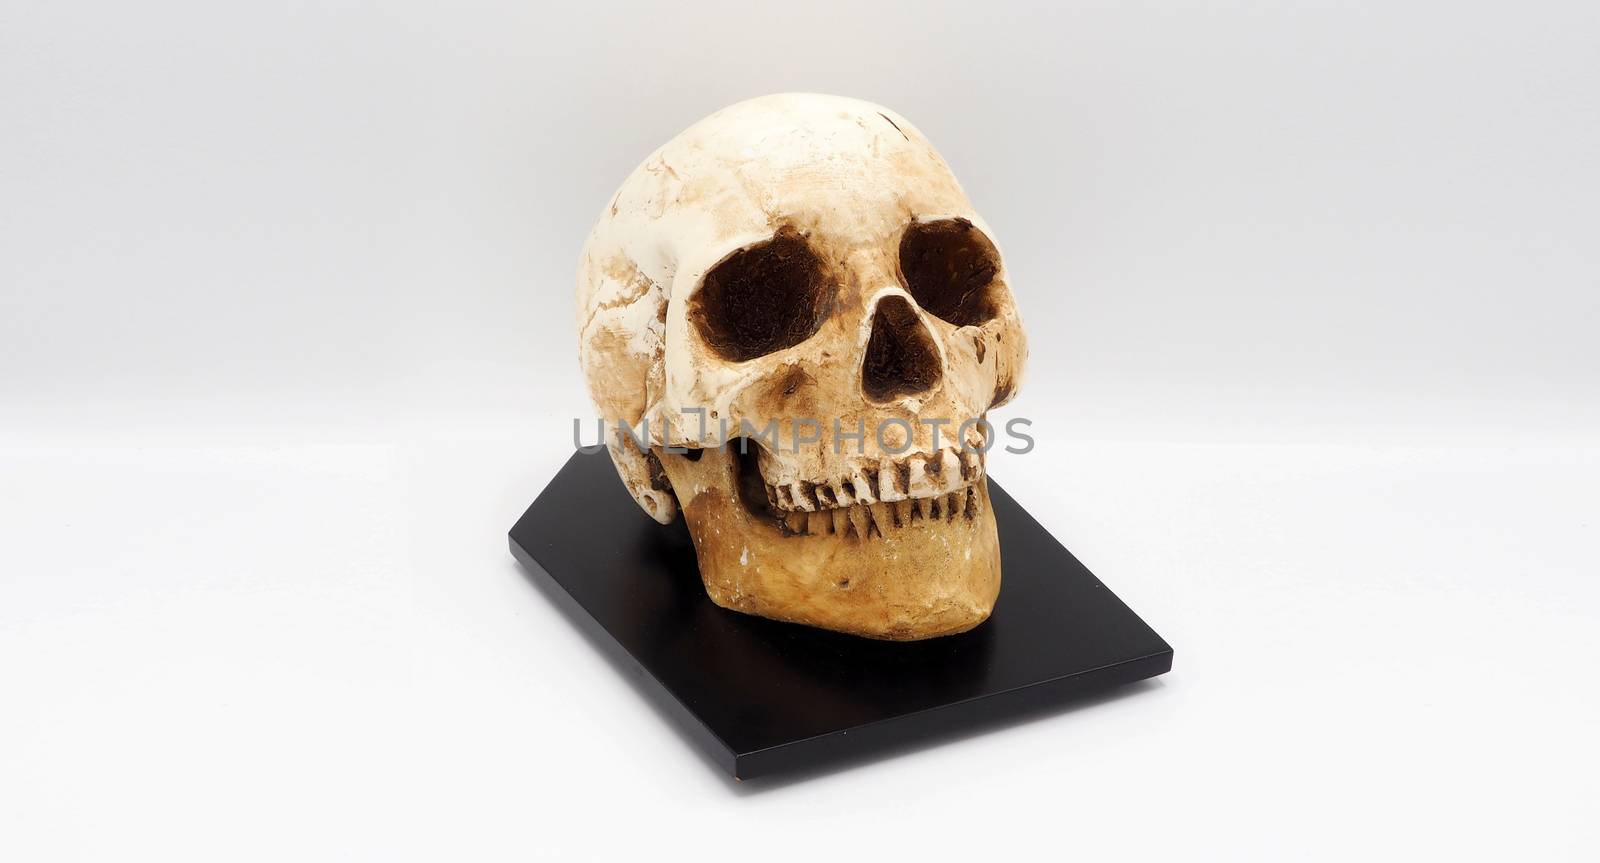 Human skull head model made from rasin plastic and white background.